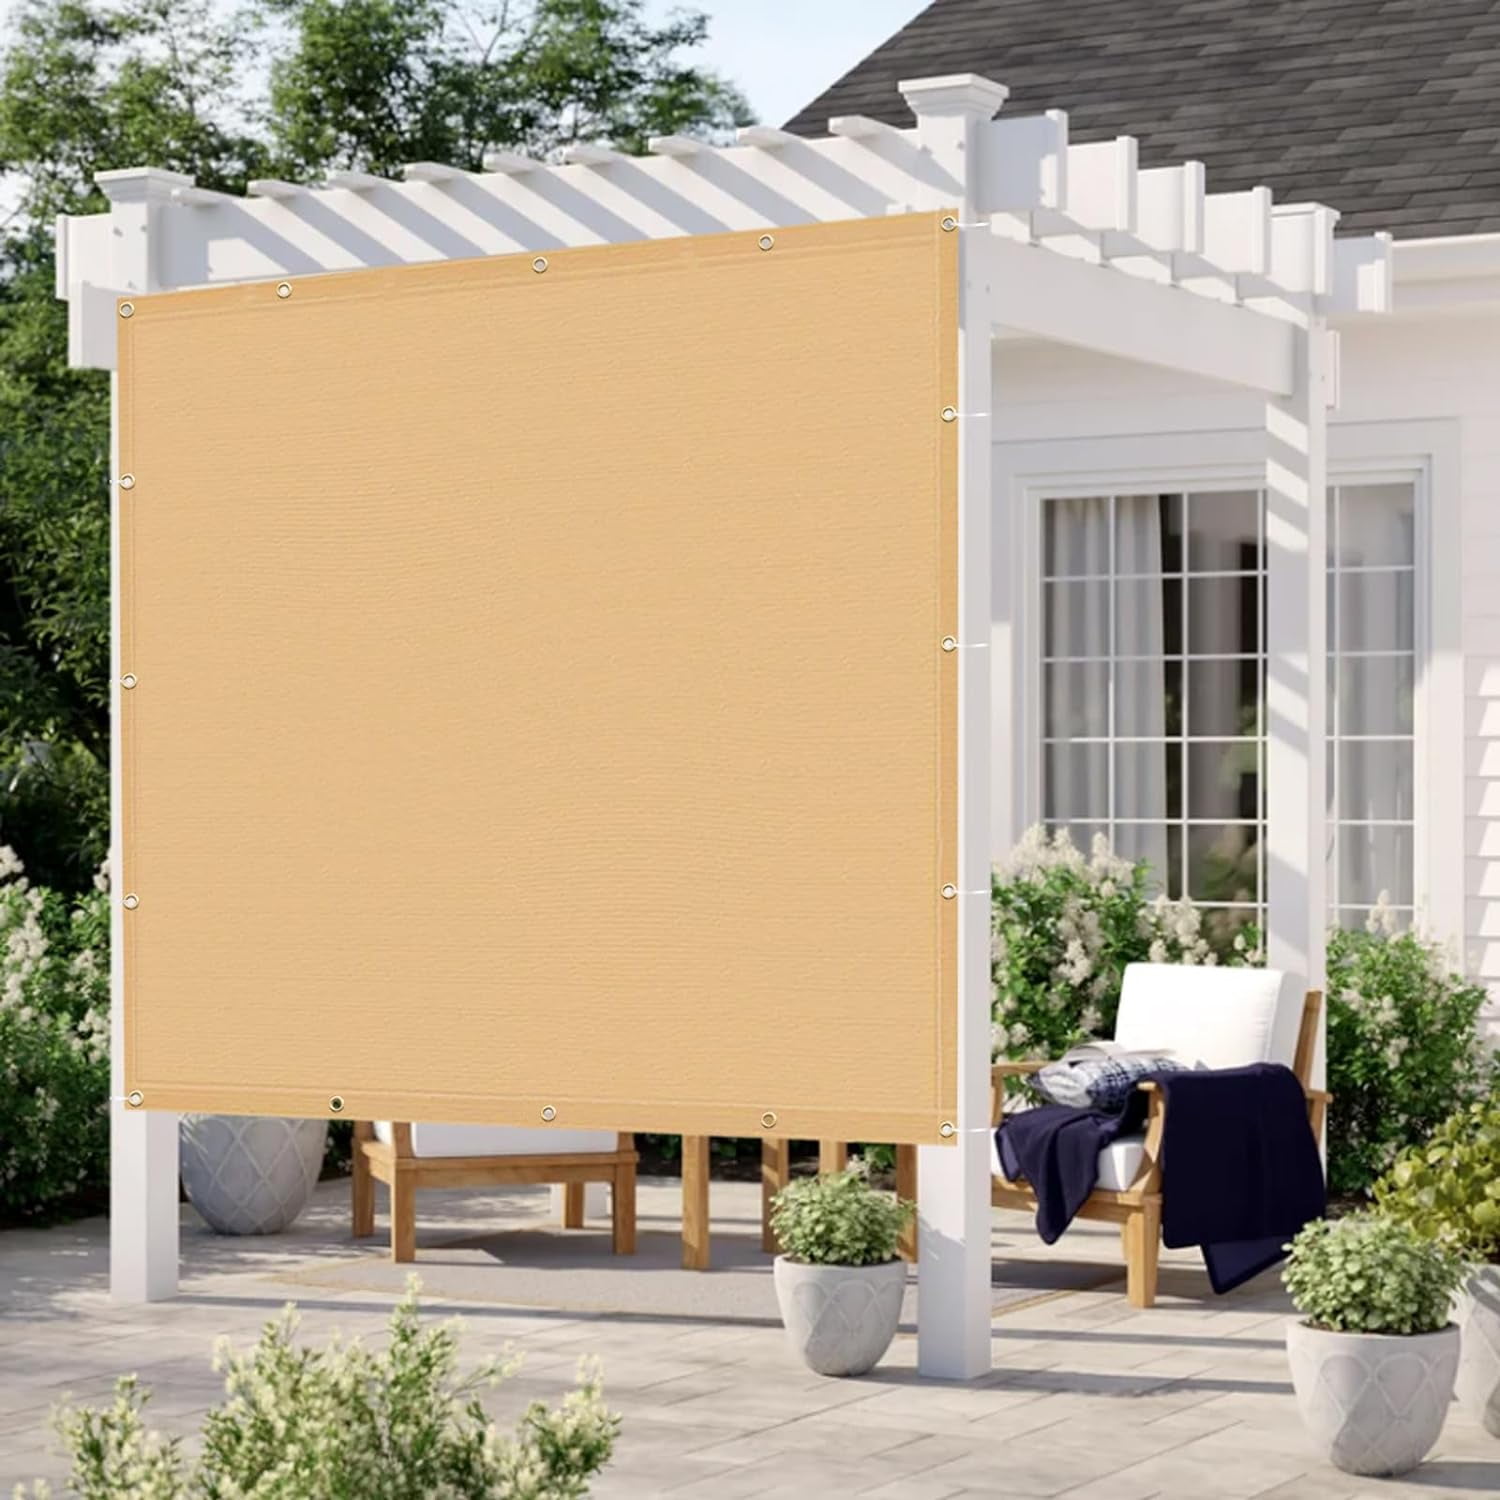 Coolaroo Privacy Screen Shade Fabric with 70% UV Block Protection